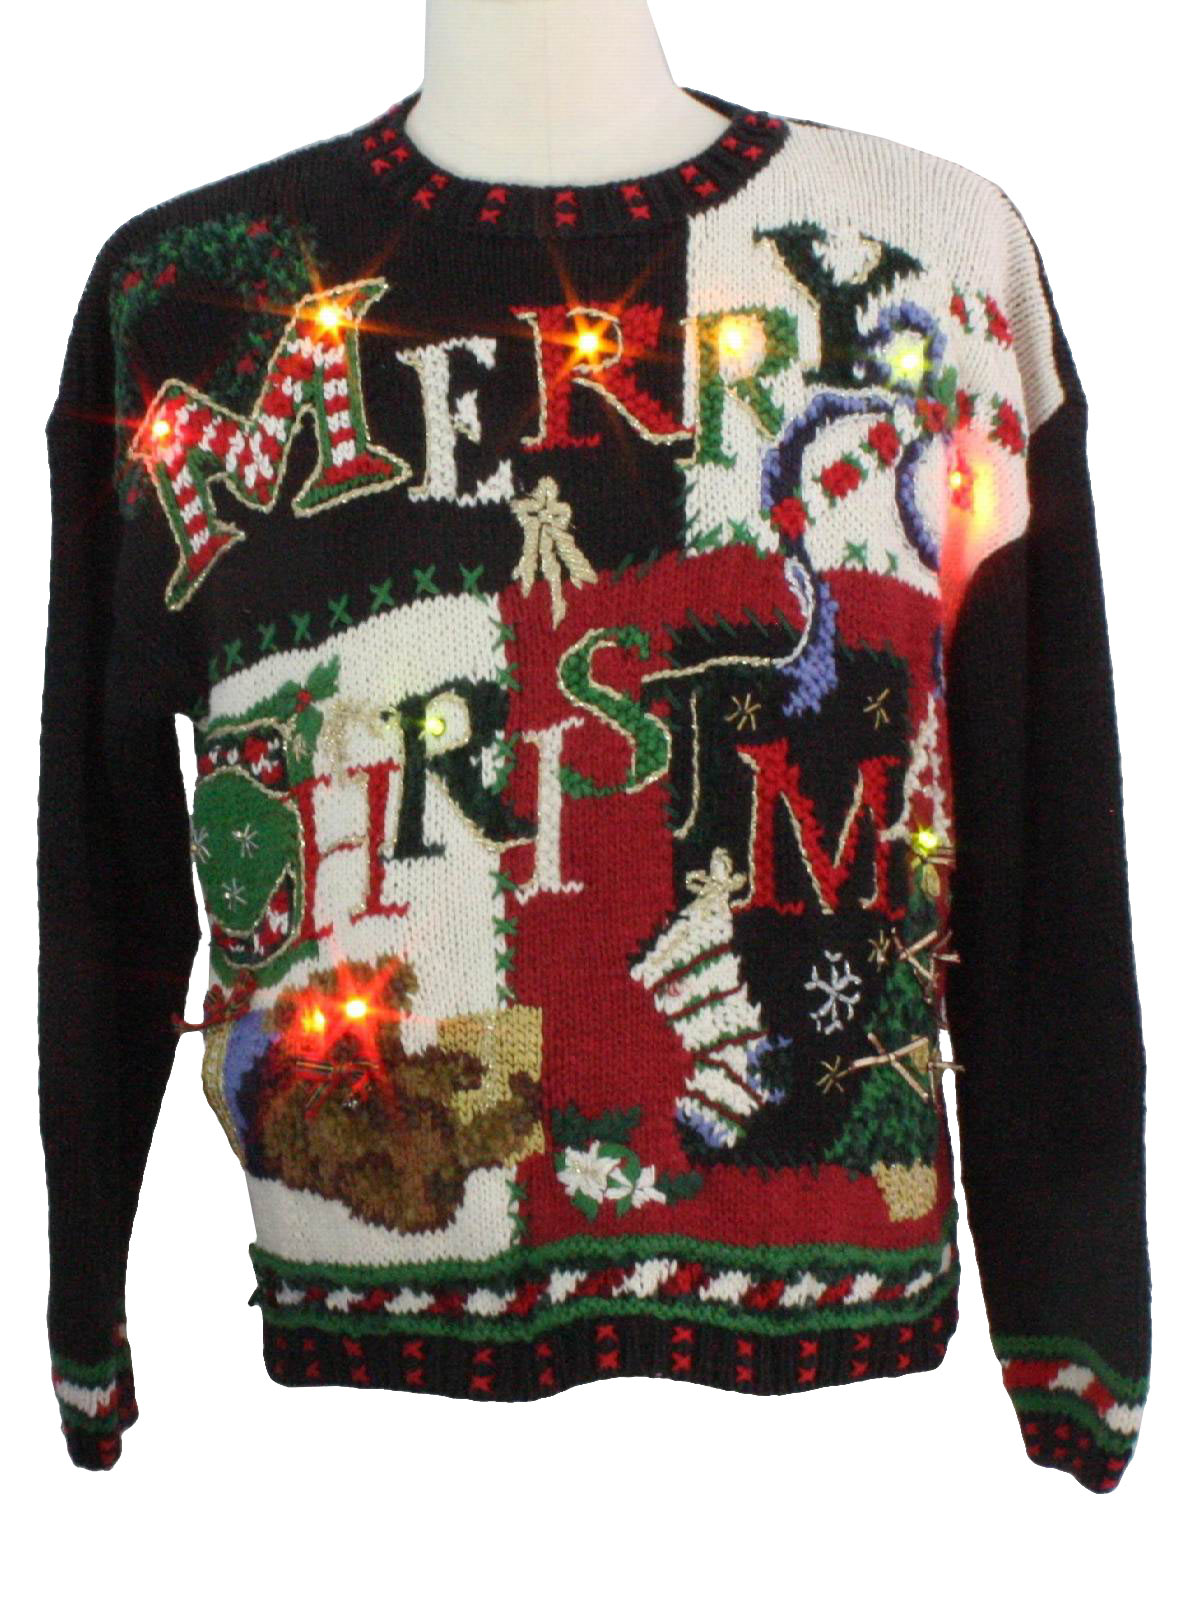 Womens Light up Ugly Christmas Sweater: -Heirloom Collectibles- Womens ...